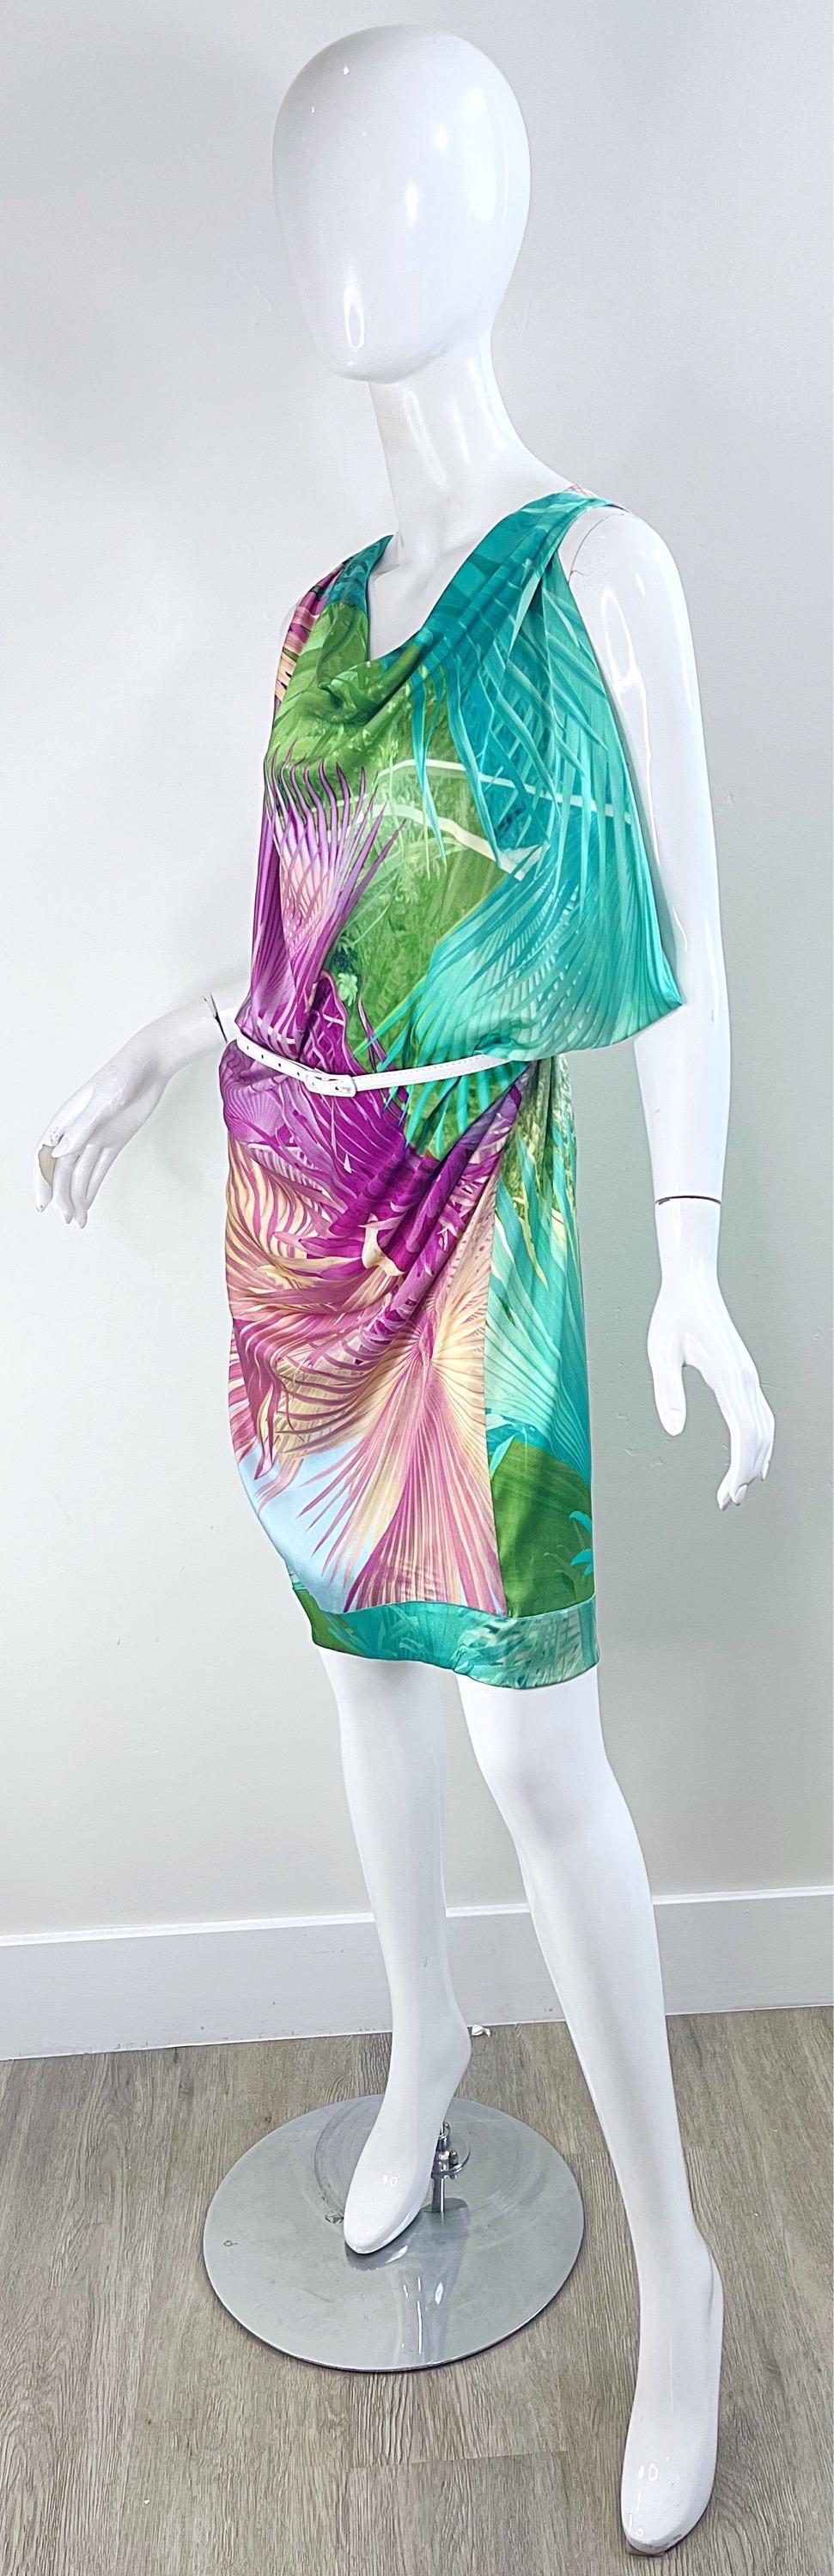 Women's 2000s Roberto Just Cavalli Size 42 / 10 - 12 Tropical Colorful Belted Silk Dress For Sale